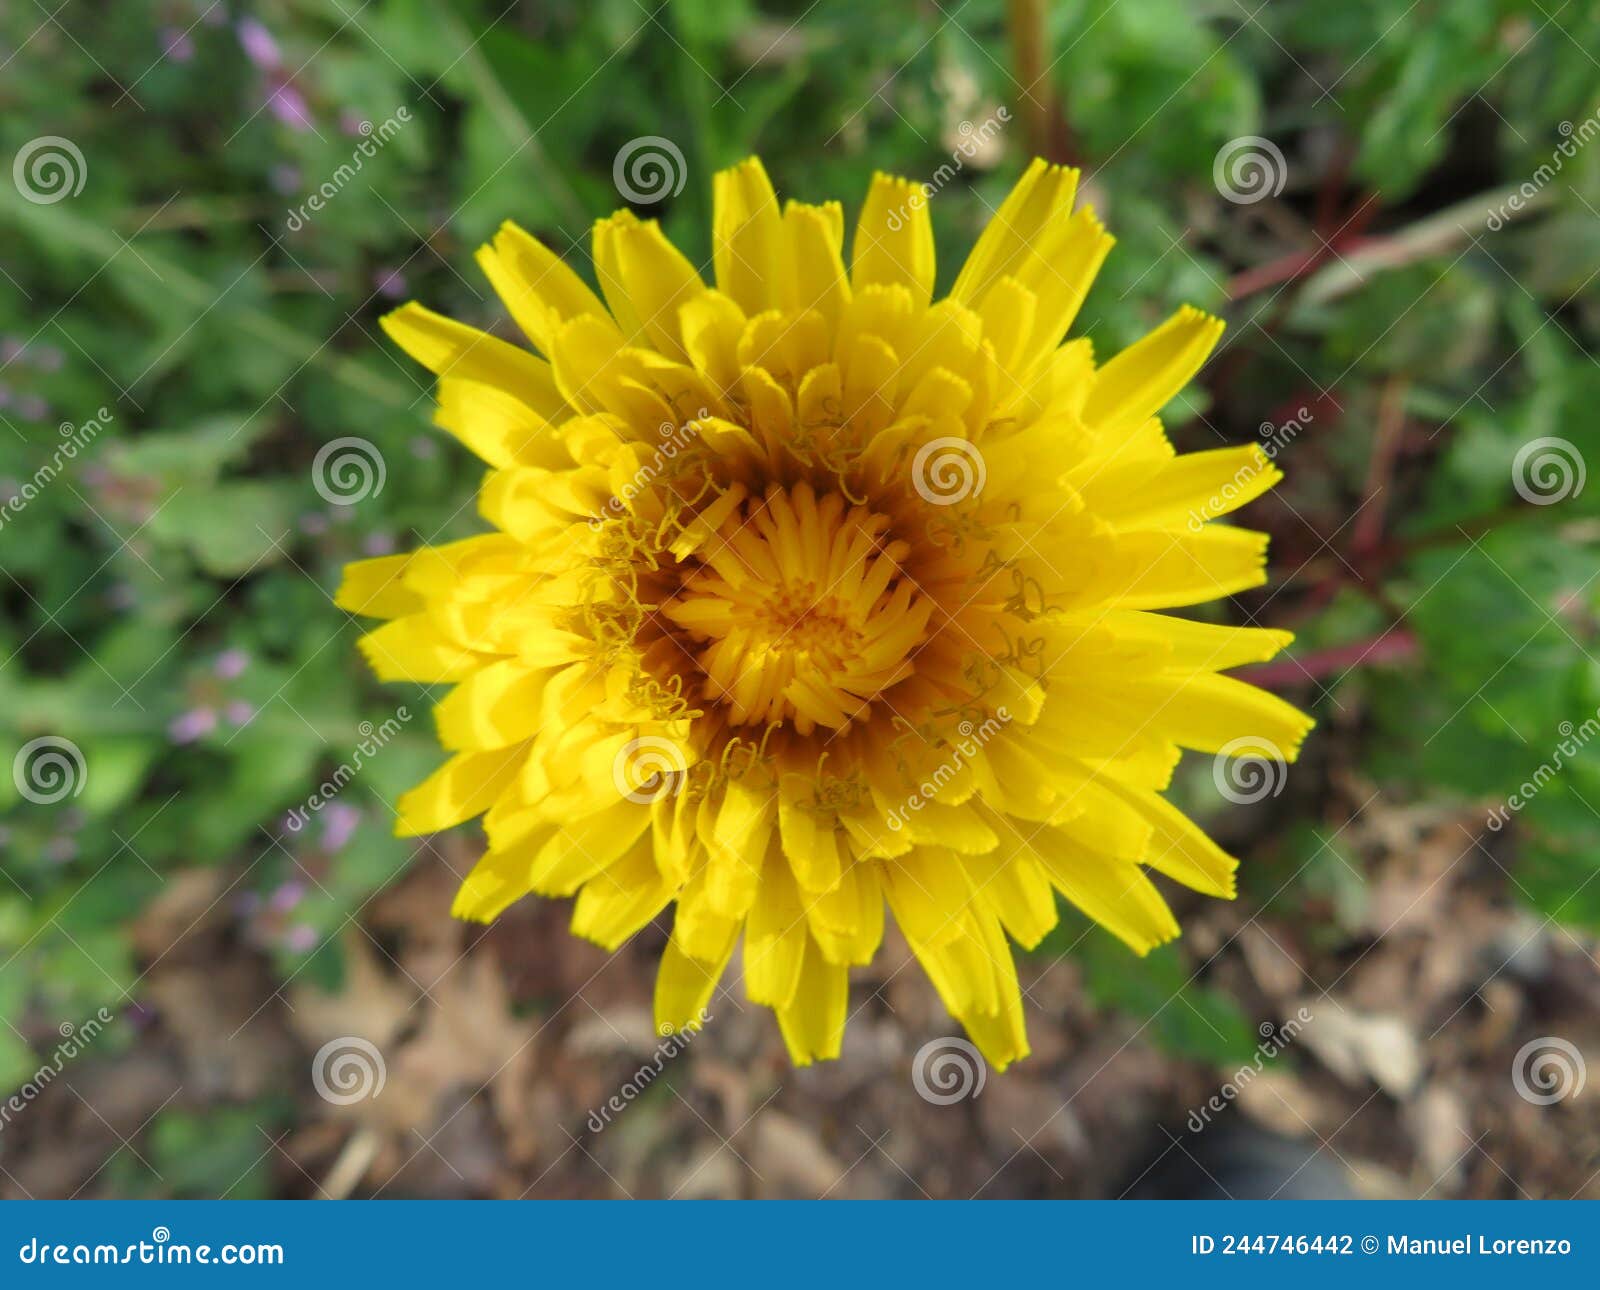 beautiful yellow flower natural dandelion smell color